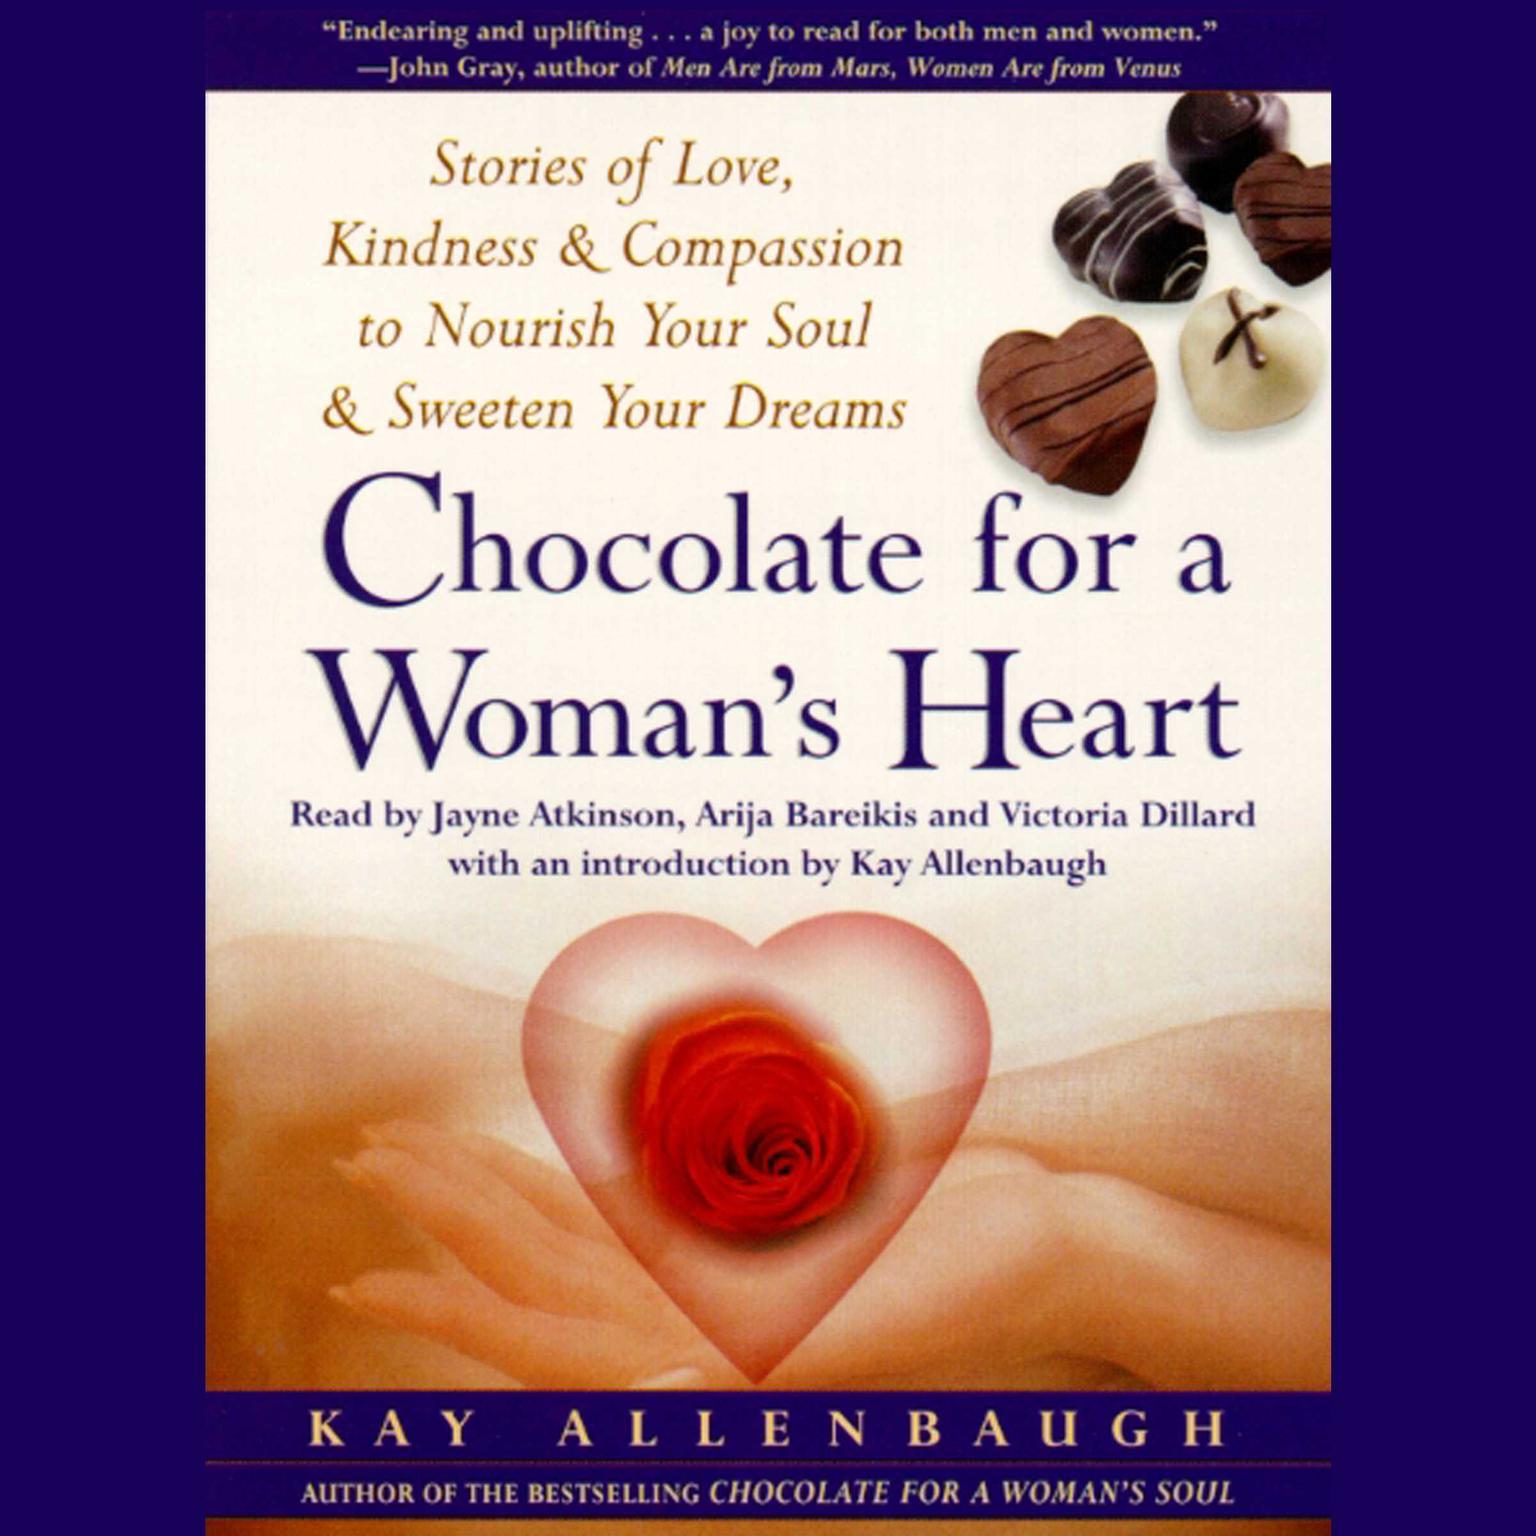 Chocolate for A Woman’s Heart (Abridged): Stories of Love, Kindness, and Compassion to Nourish Your Soul and Sweeten Your Dreams Audiobook, by Kay Allenbaugh